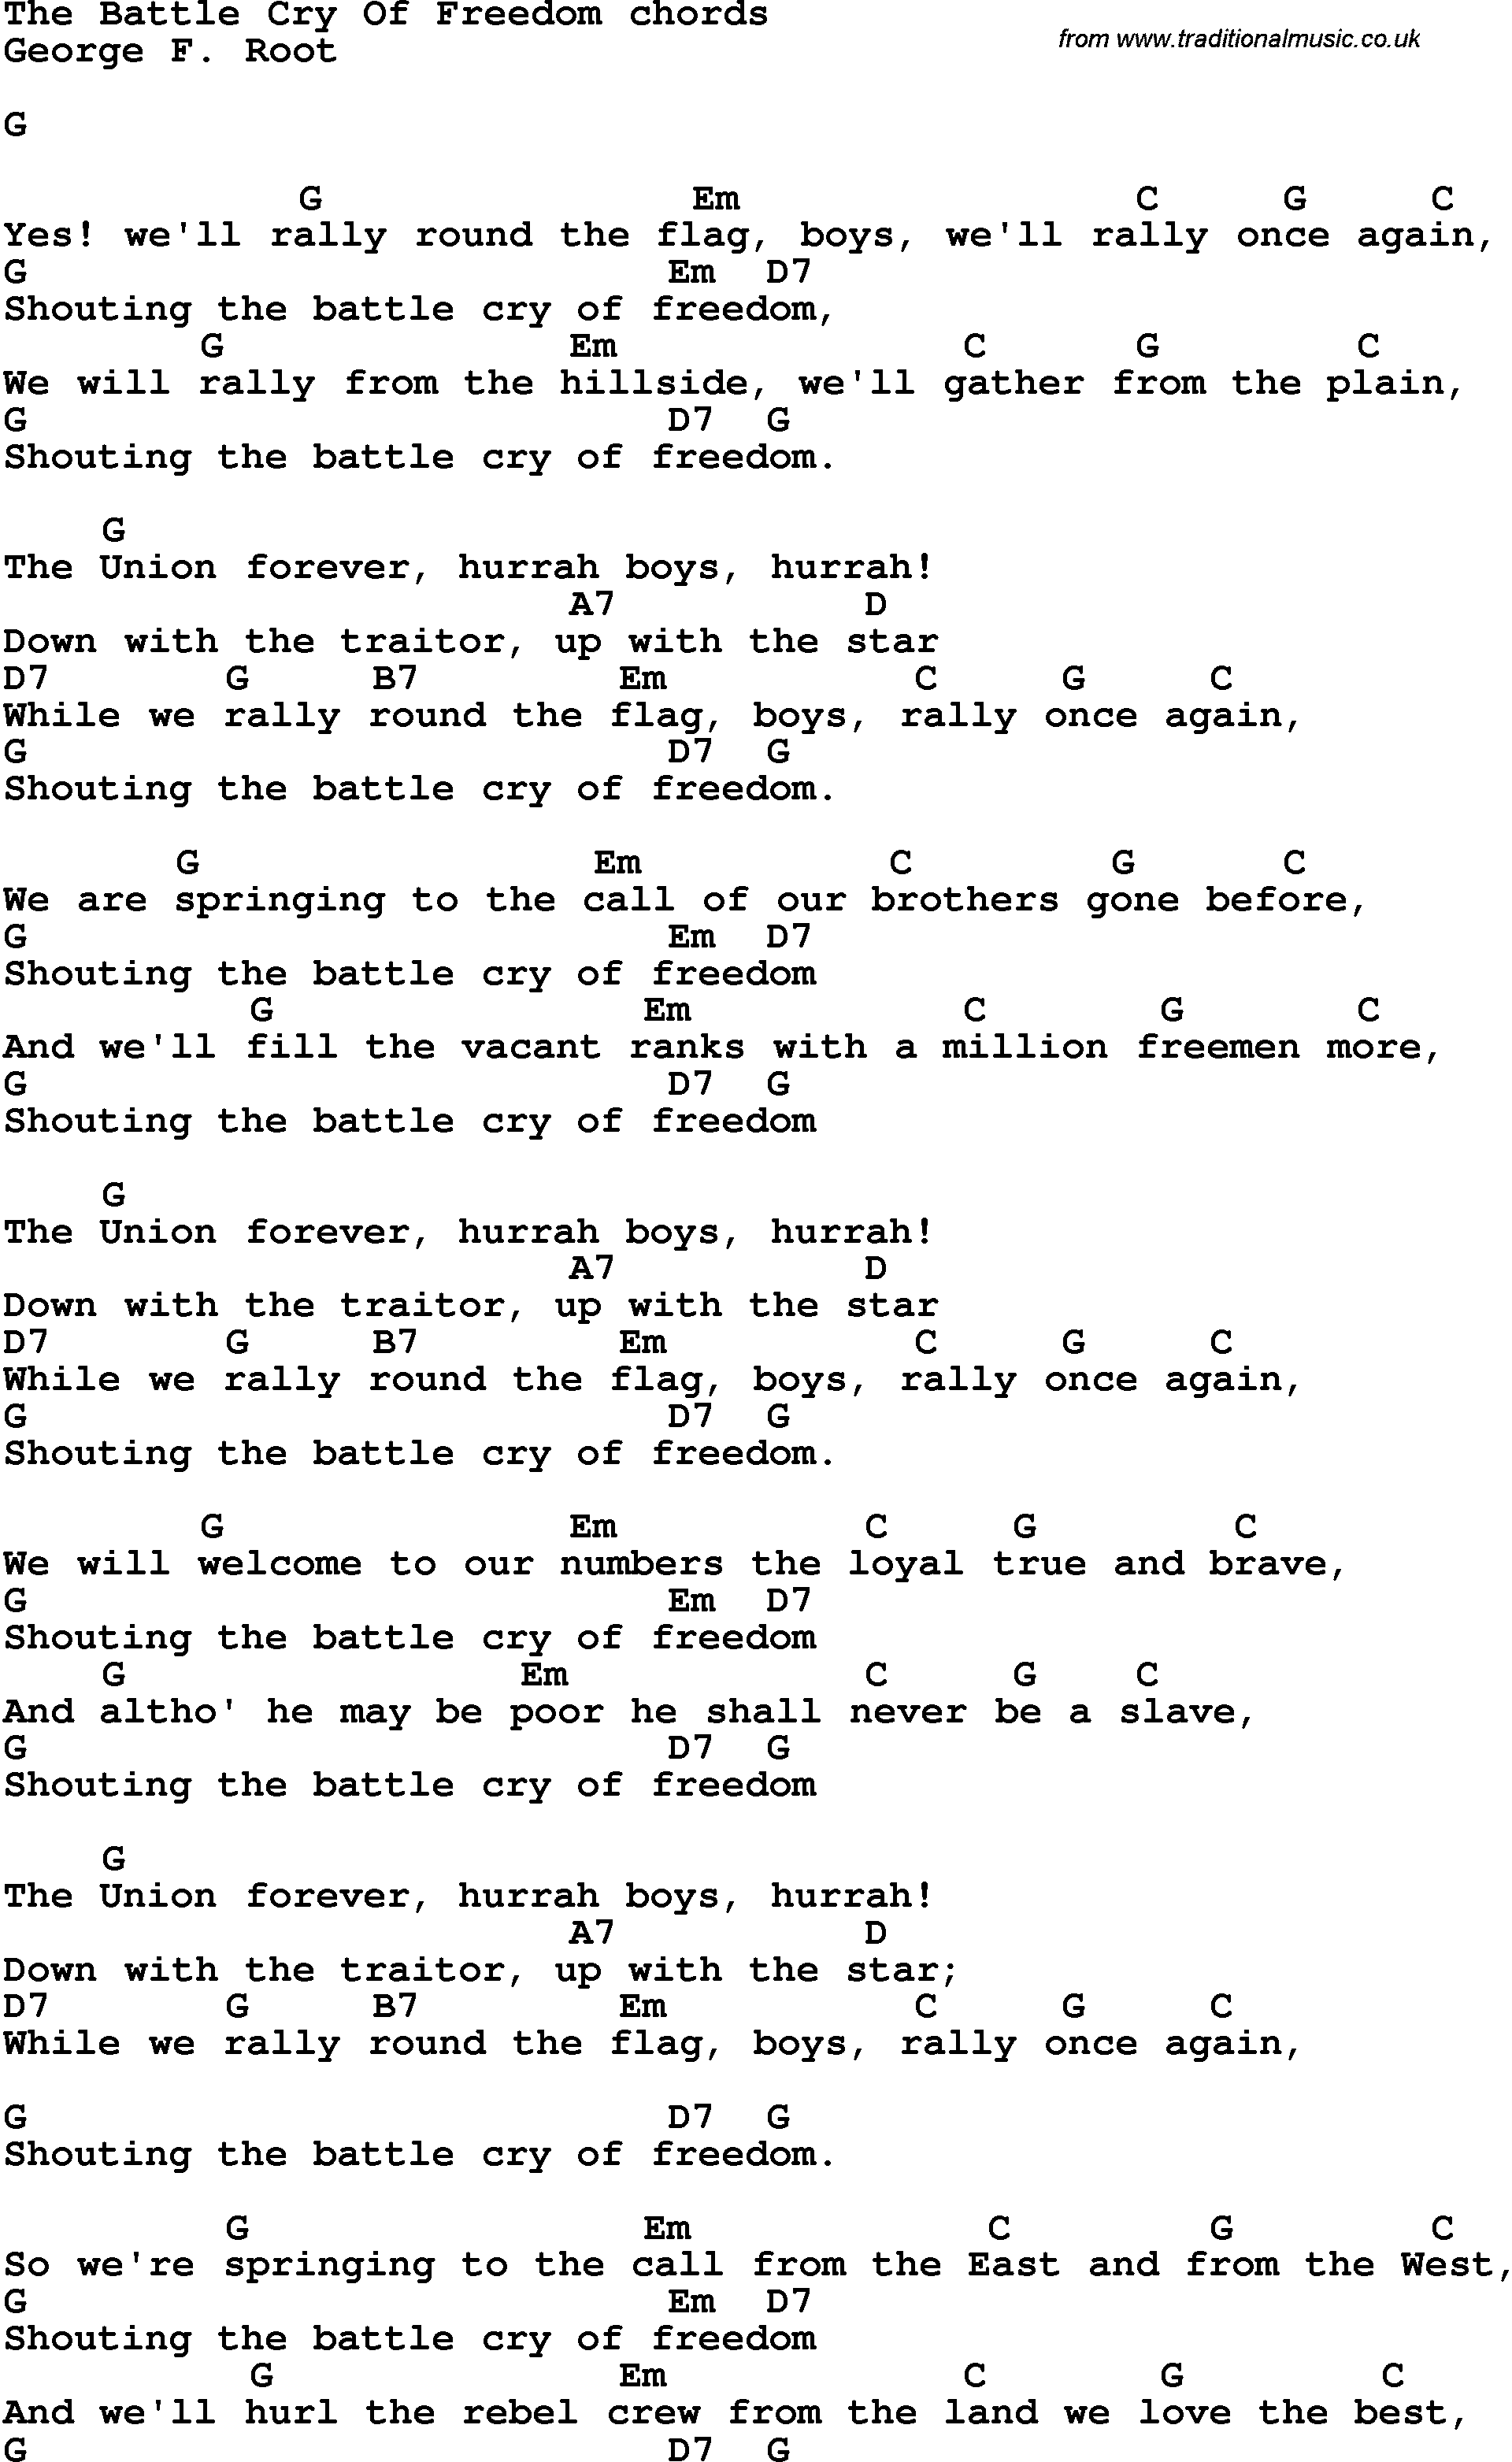 Song Lyrics with guitar chords for The Battle Cry Of Freedom